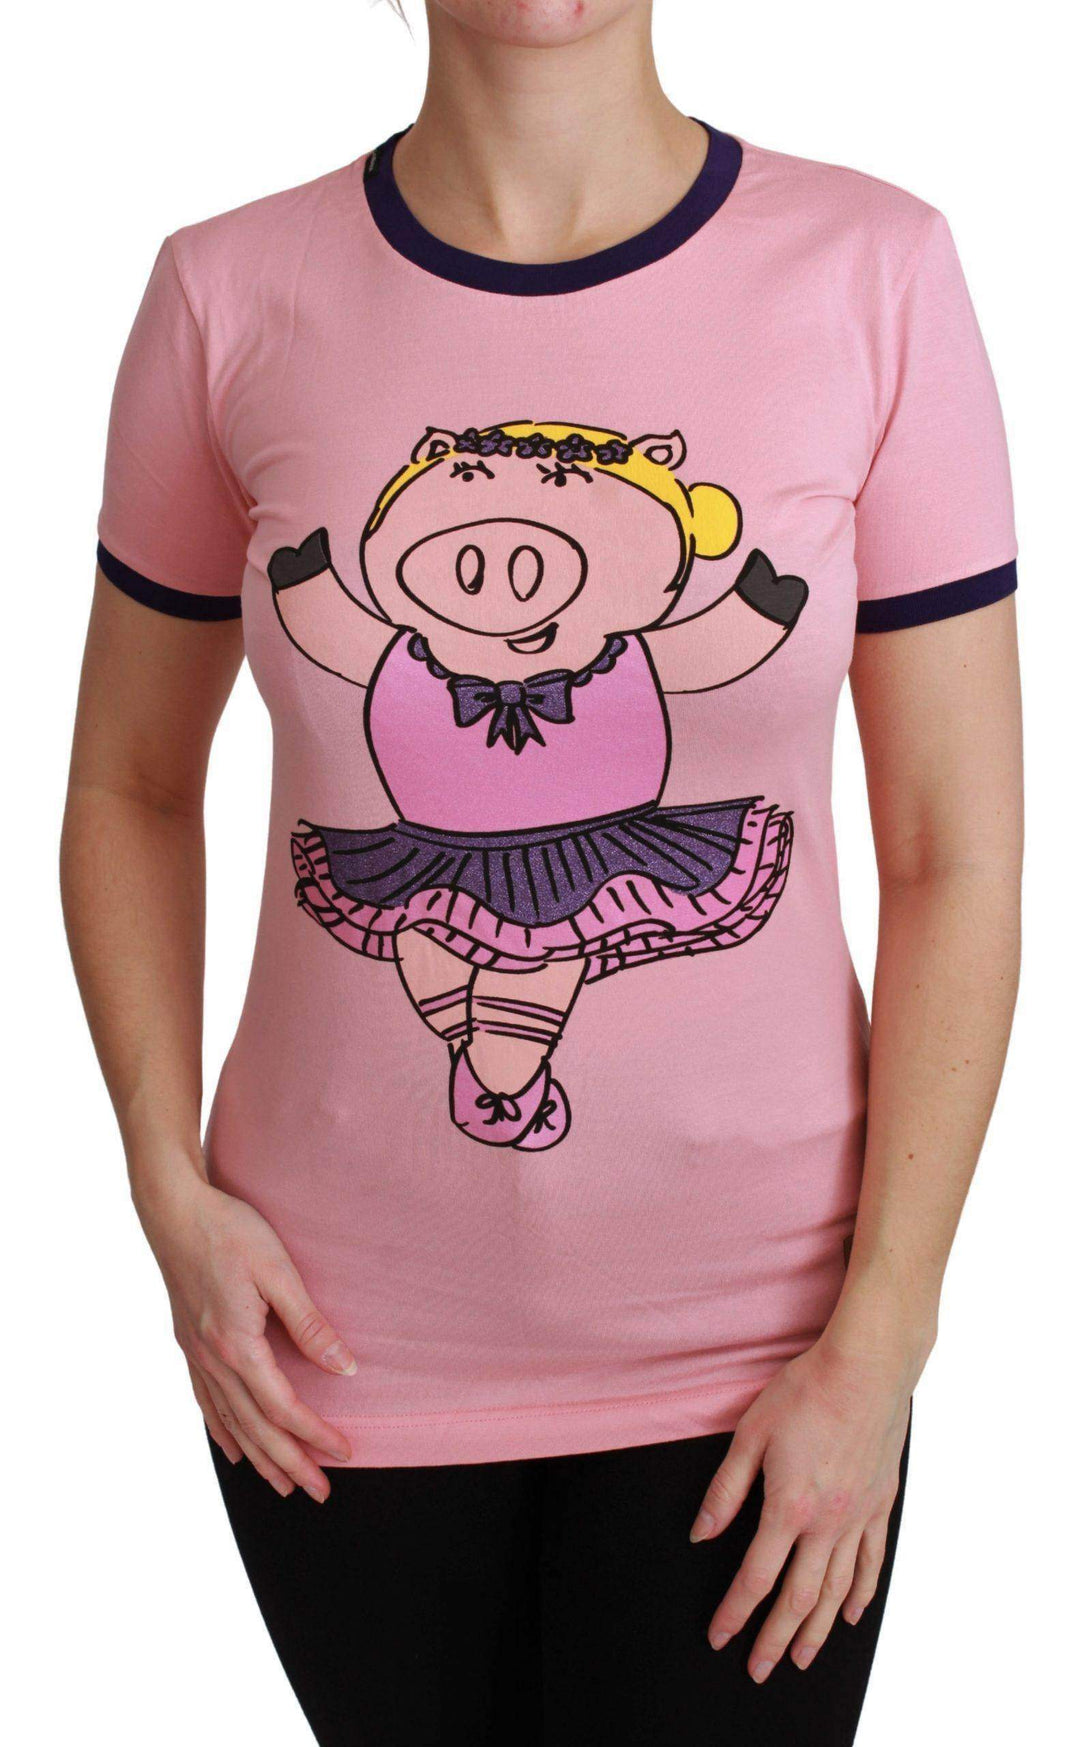 Dolce & Gabbana  Pink YEAR OF THE PIG Top Cotton T-shirt #women, Brand_Dolce & Gabbana, Catch, Dolce & Gabbana, feed-agegroup-adult, feed-color-pink, feed-gender-female, feed-size-IT36 | XS, feed-size-IT38|XS, feed-size-IT40|S, feed-size-IT42|M, feed-size-IT44|L, feed-size-IT46|XL, Gender_Women, IT36 | XS, IT38|XS, IT40|S, IT42|M, IT44|L, IT46|XL, Kogan, Pink, Tops & T-Shirts - Women - Clothing, Women - New Arrivals at SEYMAYKA